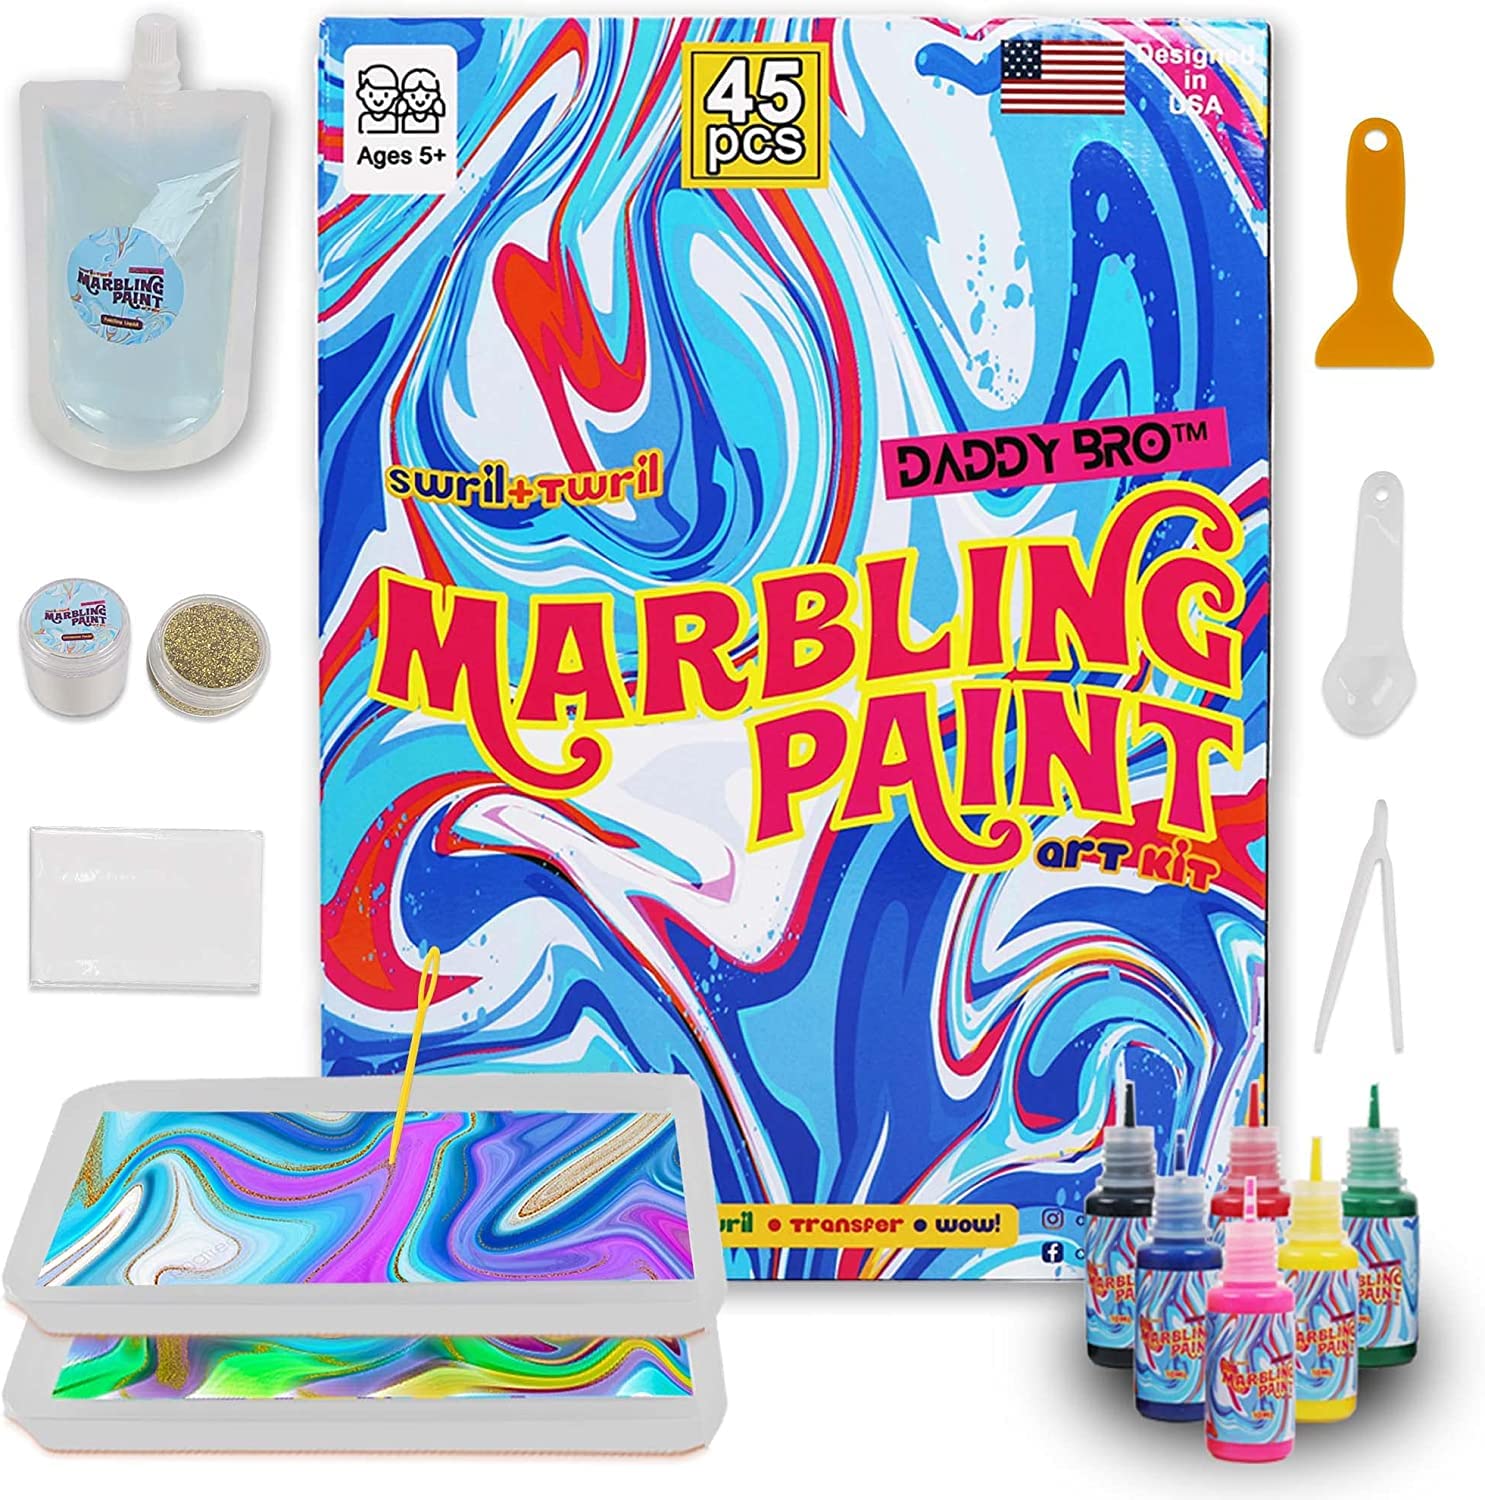 DADDY BRO Marble Painting Kits - Arts and Crafts for Girls & Boys Ages 6-12  - Best Tween Paint Gift Ideas for Kids Activities Age 4-10 Year Old - Marbling  Paint Art Kit for Kids